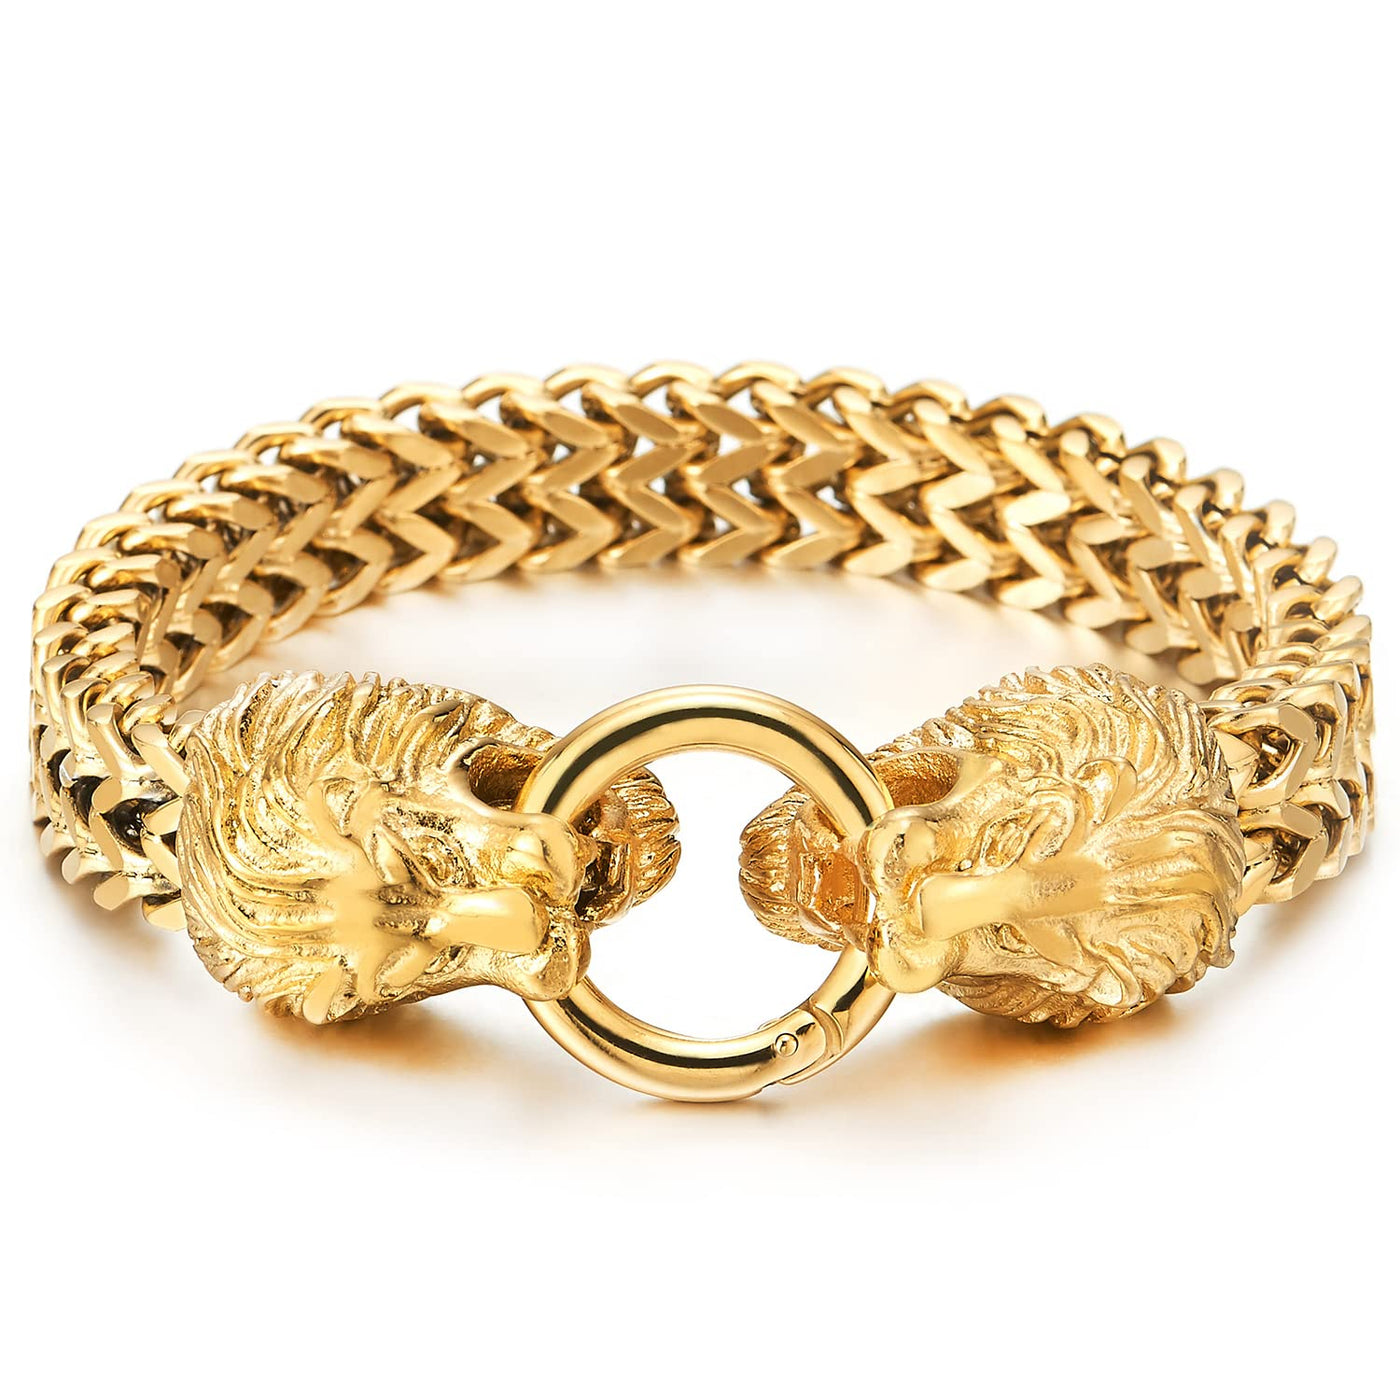 Gold Color Collections - COOLSTEELANDBEYOND Jewelry